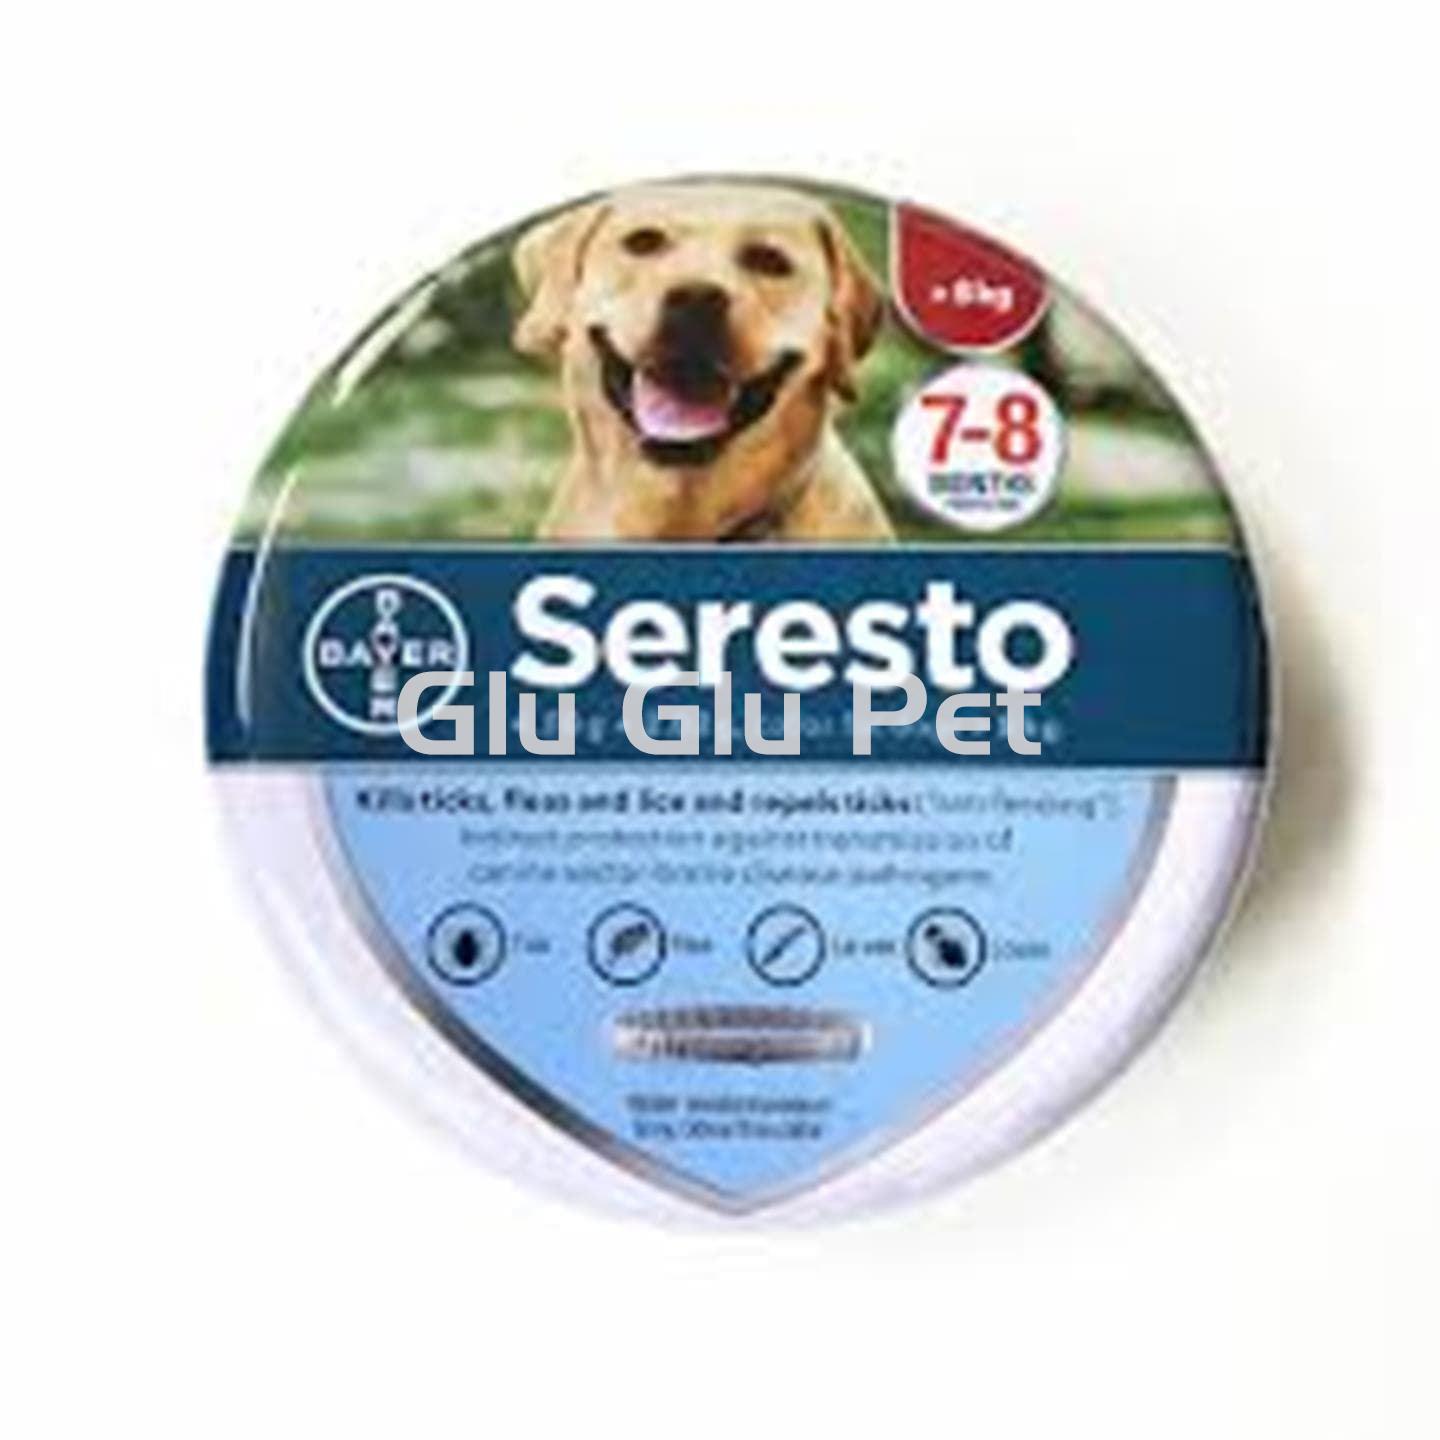 Seresto antiparasitic collar for dogs over 8 kg - Image 1